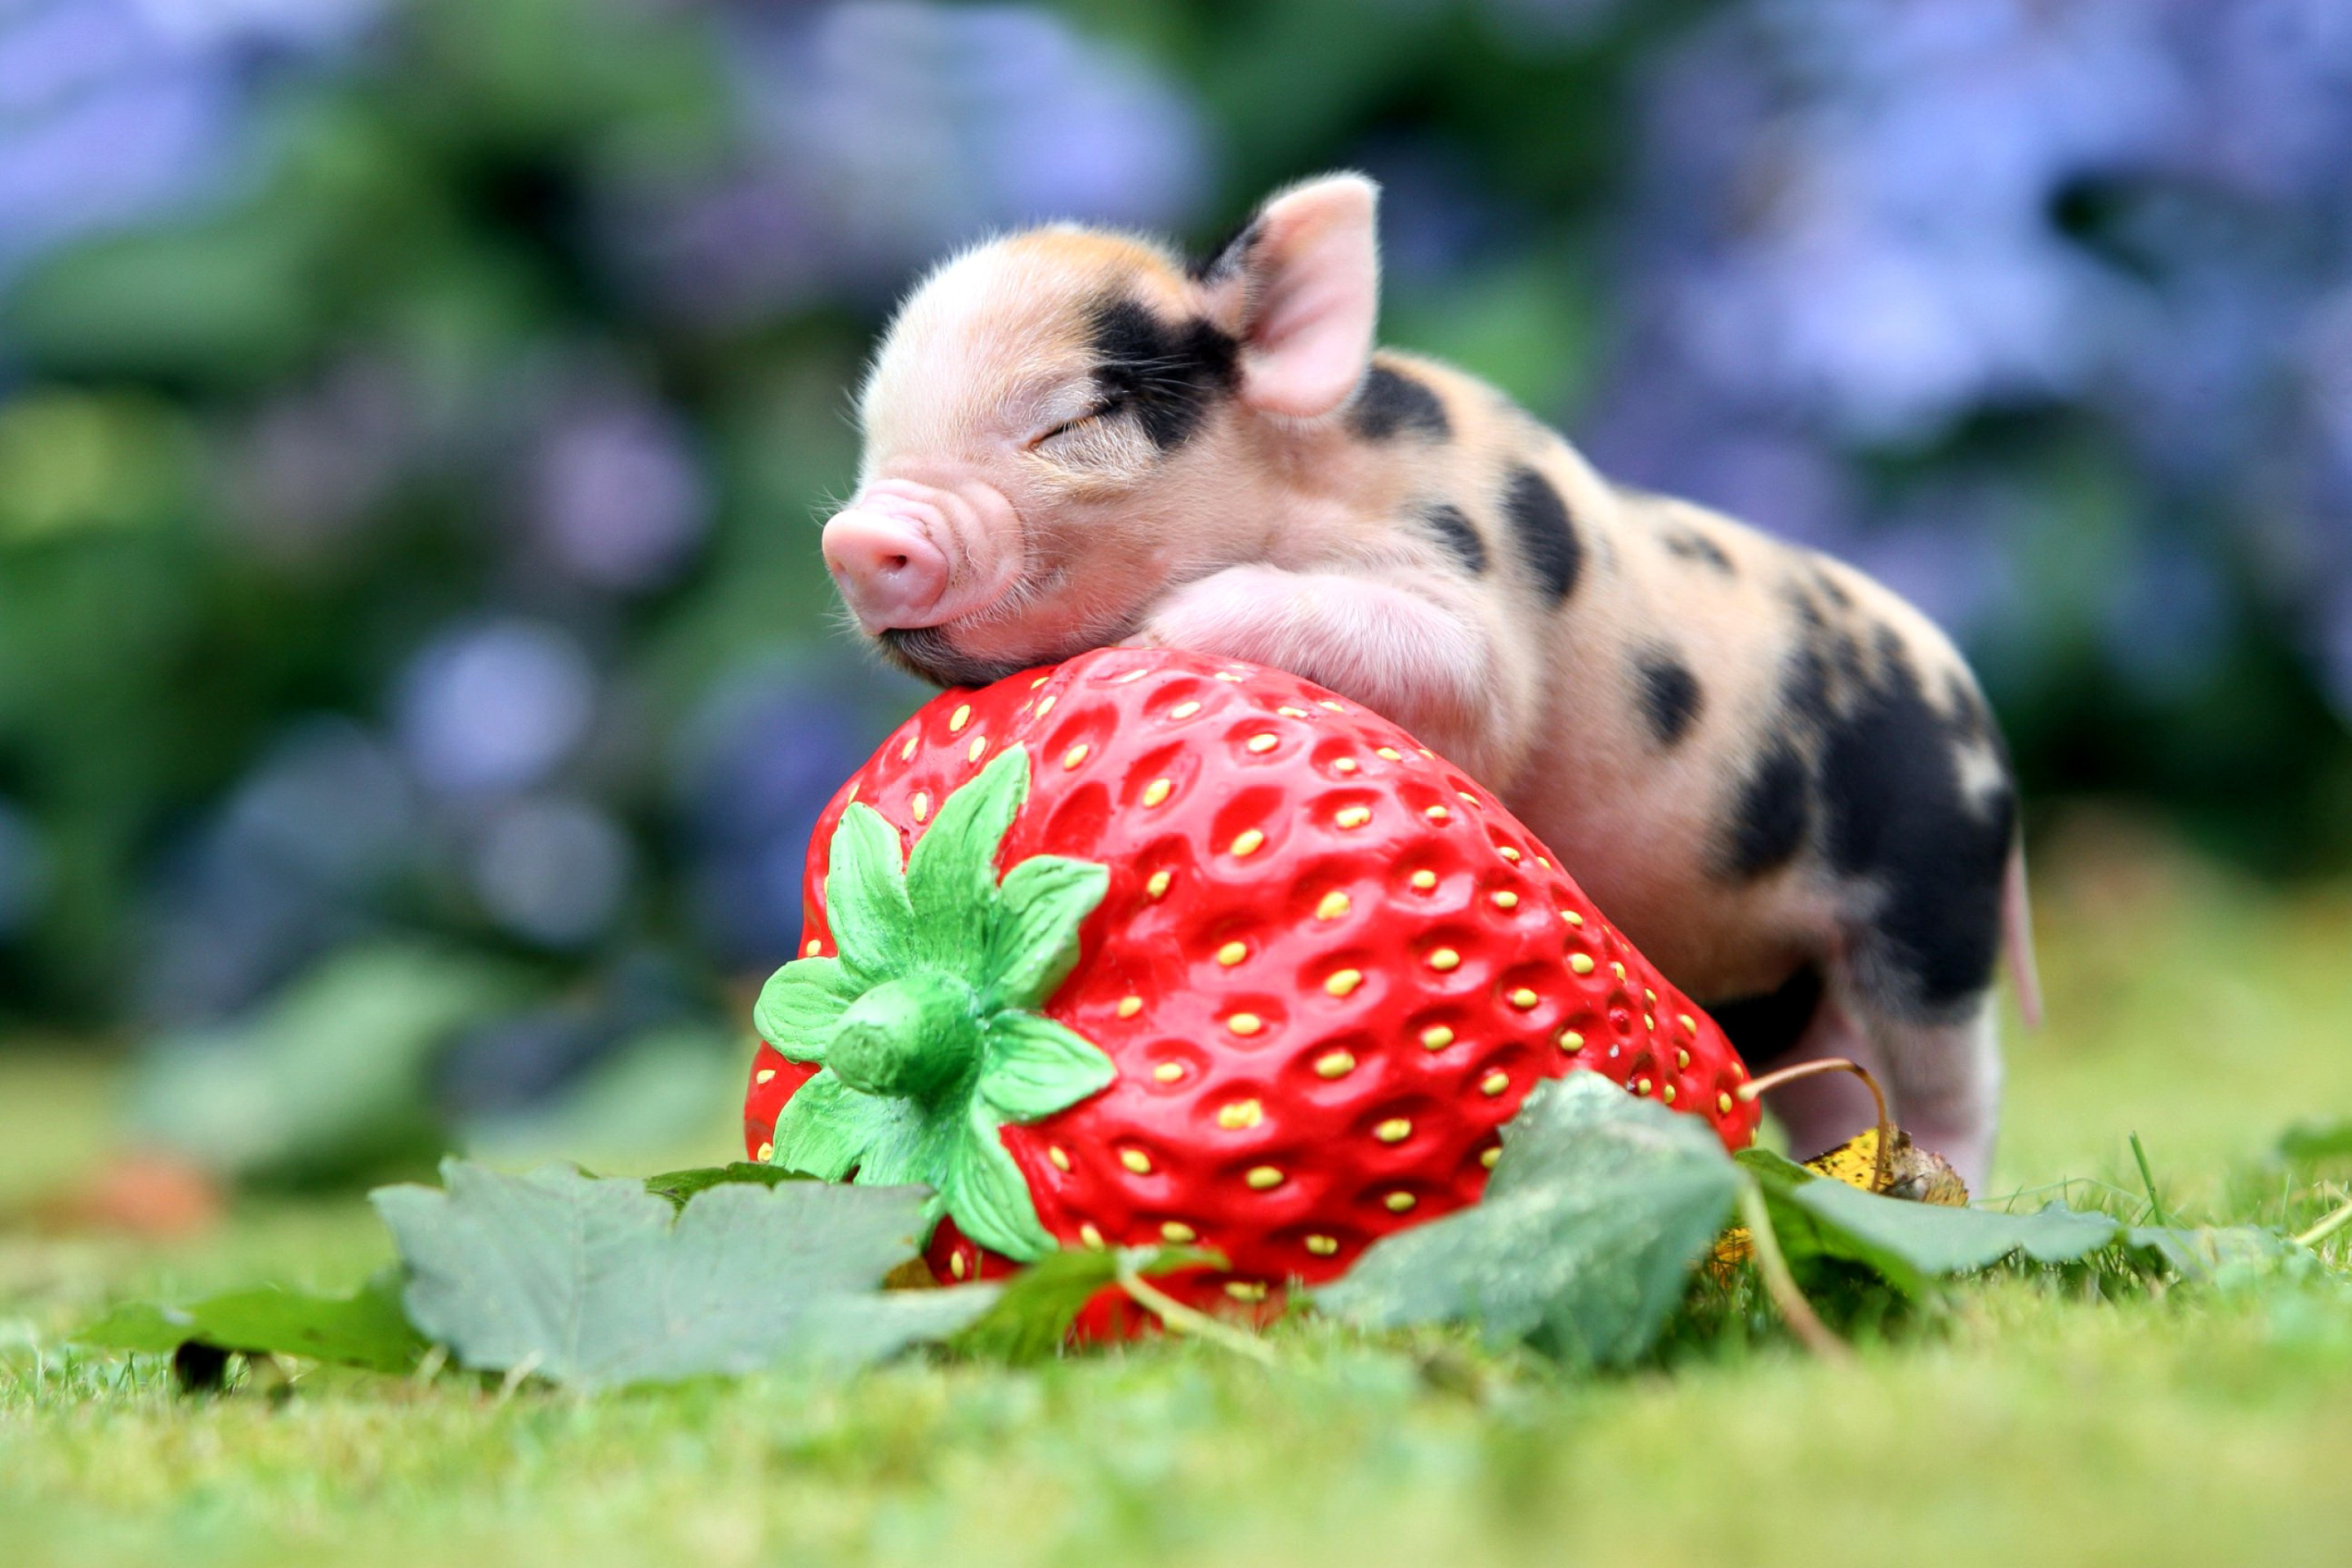 Pig and Strawberry wallpaper 2880x1920